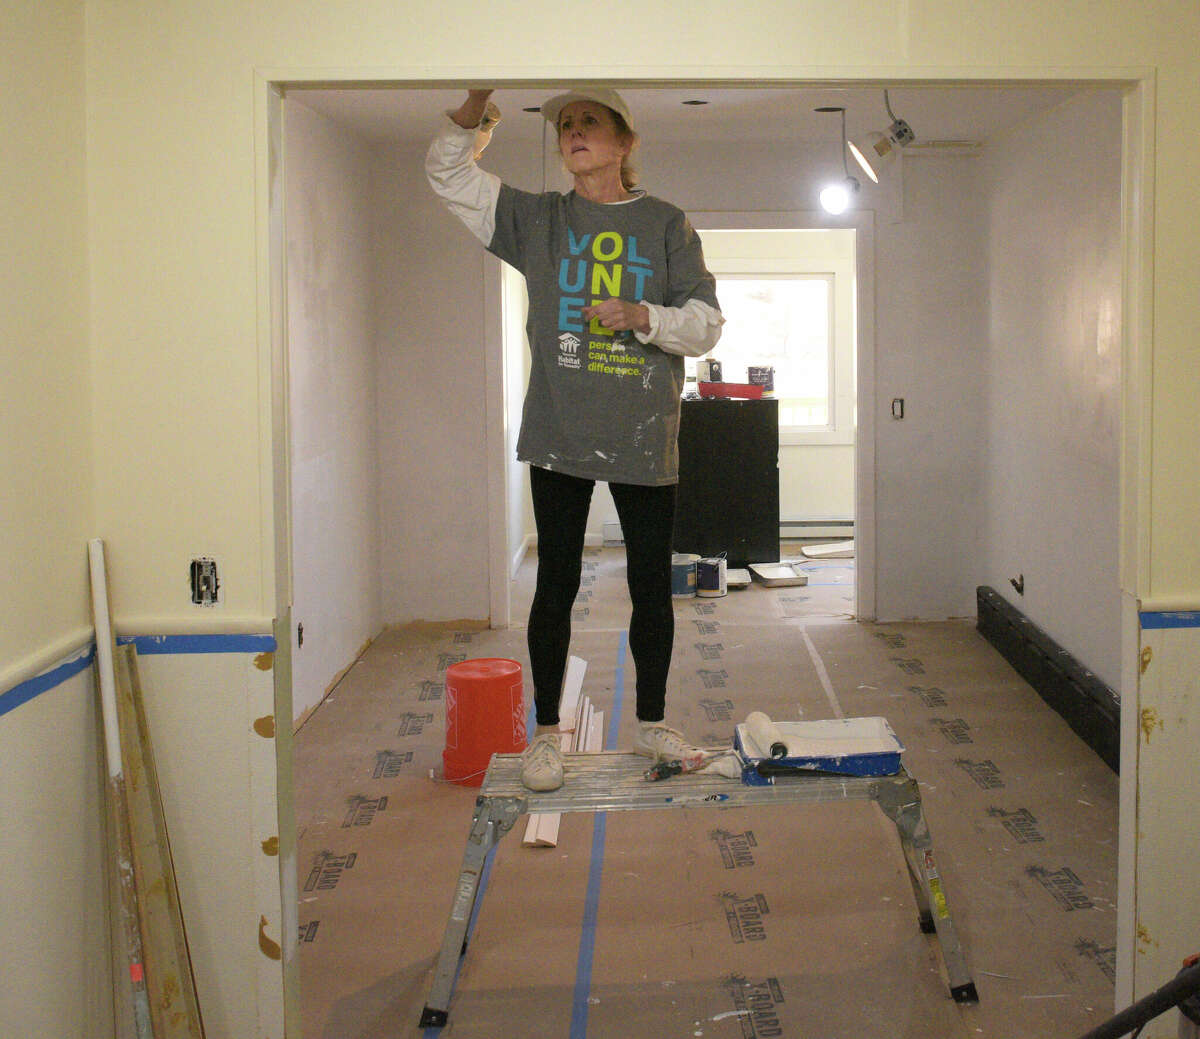 Volunteer Nancy Toussaint, of Danbury, works with other volunteers on an Ability Beyond group home that is the first-ever collaboration between non-profits Housatonic Habitat for Humanity and Ability Beyond. They are renovating/upgrading an Ability Beyond group home in Danbury, Conn. Thursday, February 2, 2023.